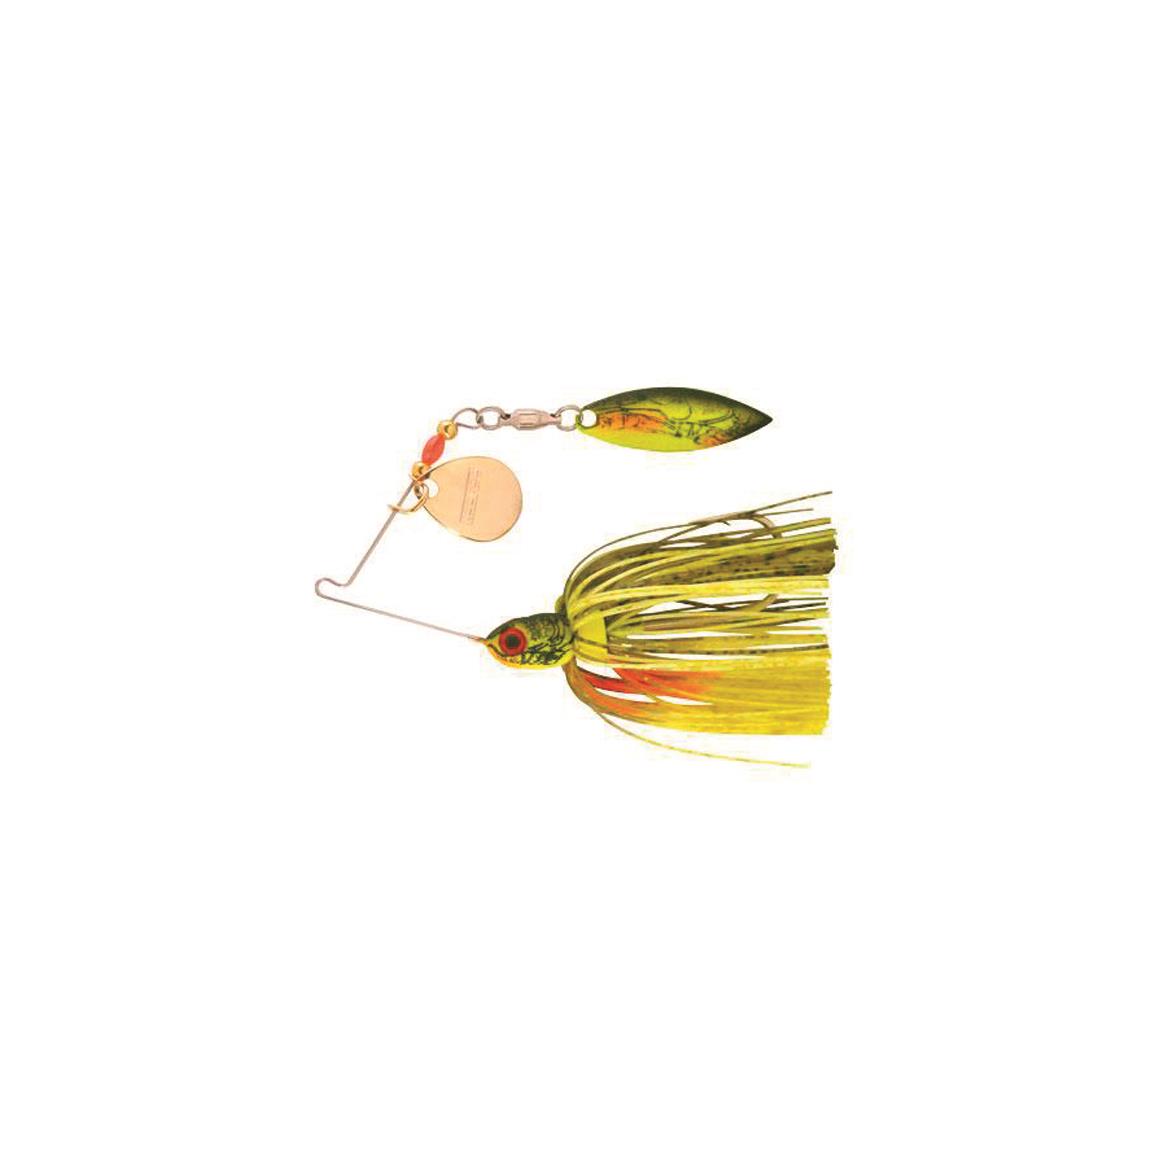 Johnson Beetle Spin® - 733161, Spinnerbaits at Sportsman's Guide